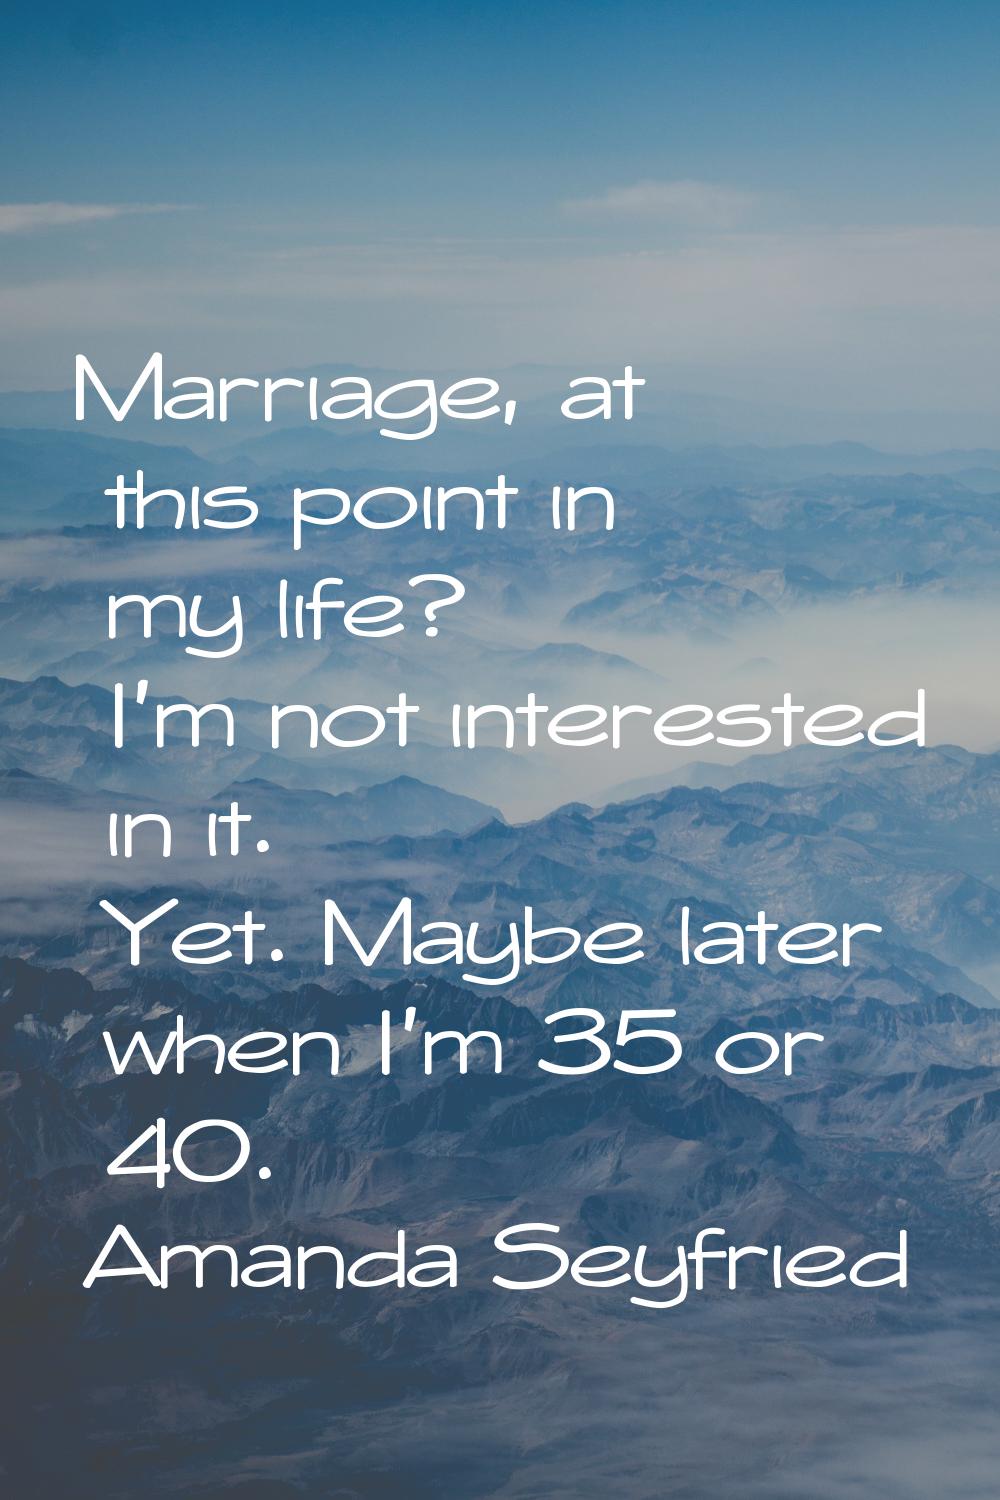 Marriage, at this point in my life? I'm not interested in it. Yet. Maybe later when I'm 35 or 40.